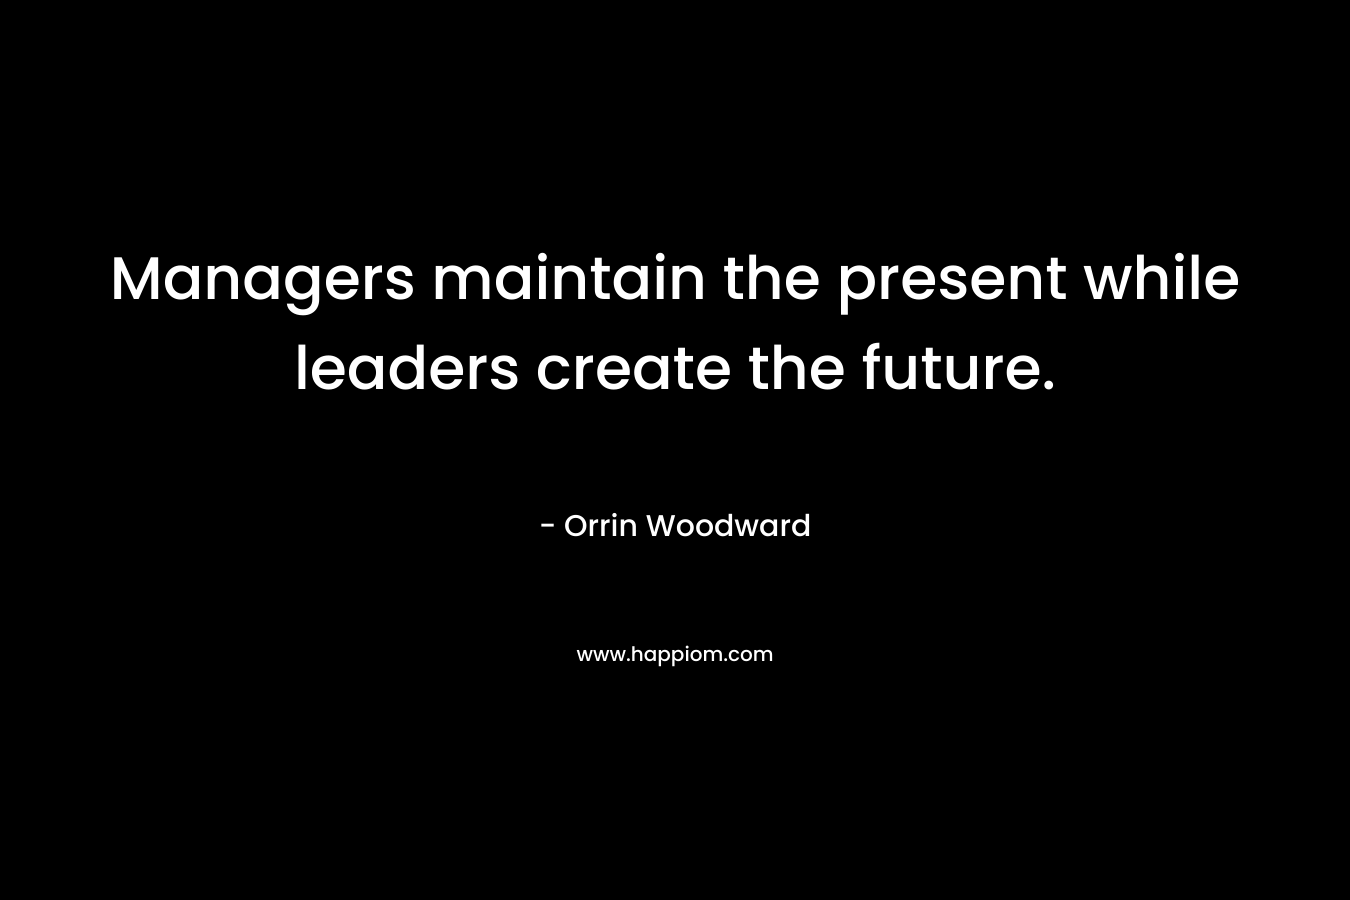 Managers maintain the present while leaders create the future. – Orrin Woodward